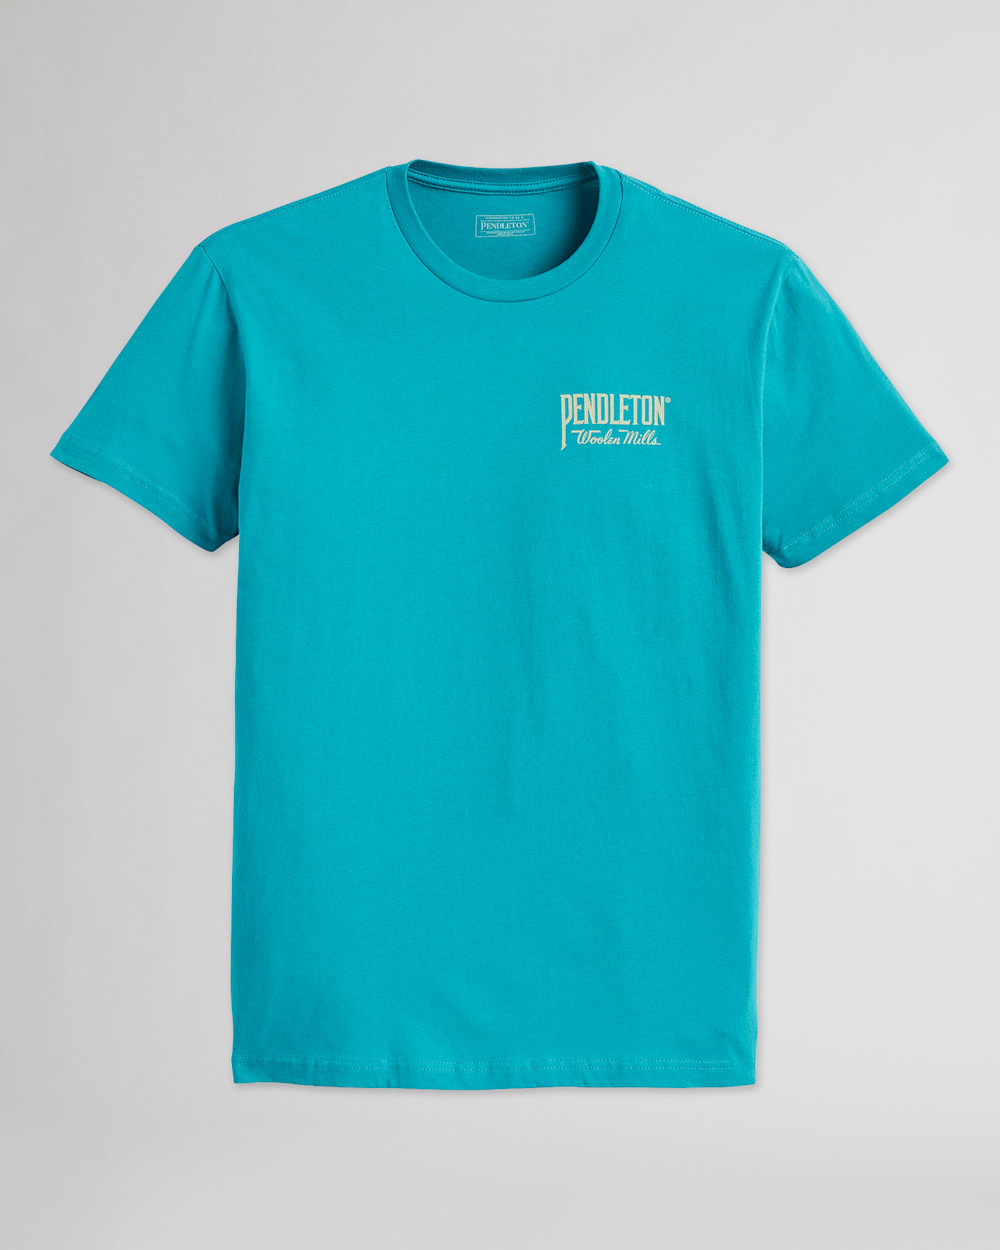 ALTERNATE VIEW OF MEN'S ORIGINAL WESTERN GRAPHIC TEE IN TEAL/WHITE image number 5